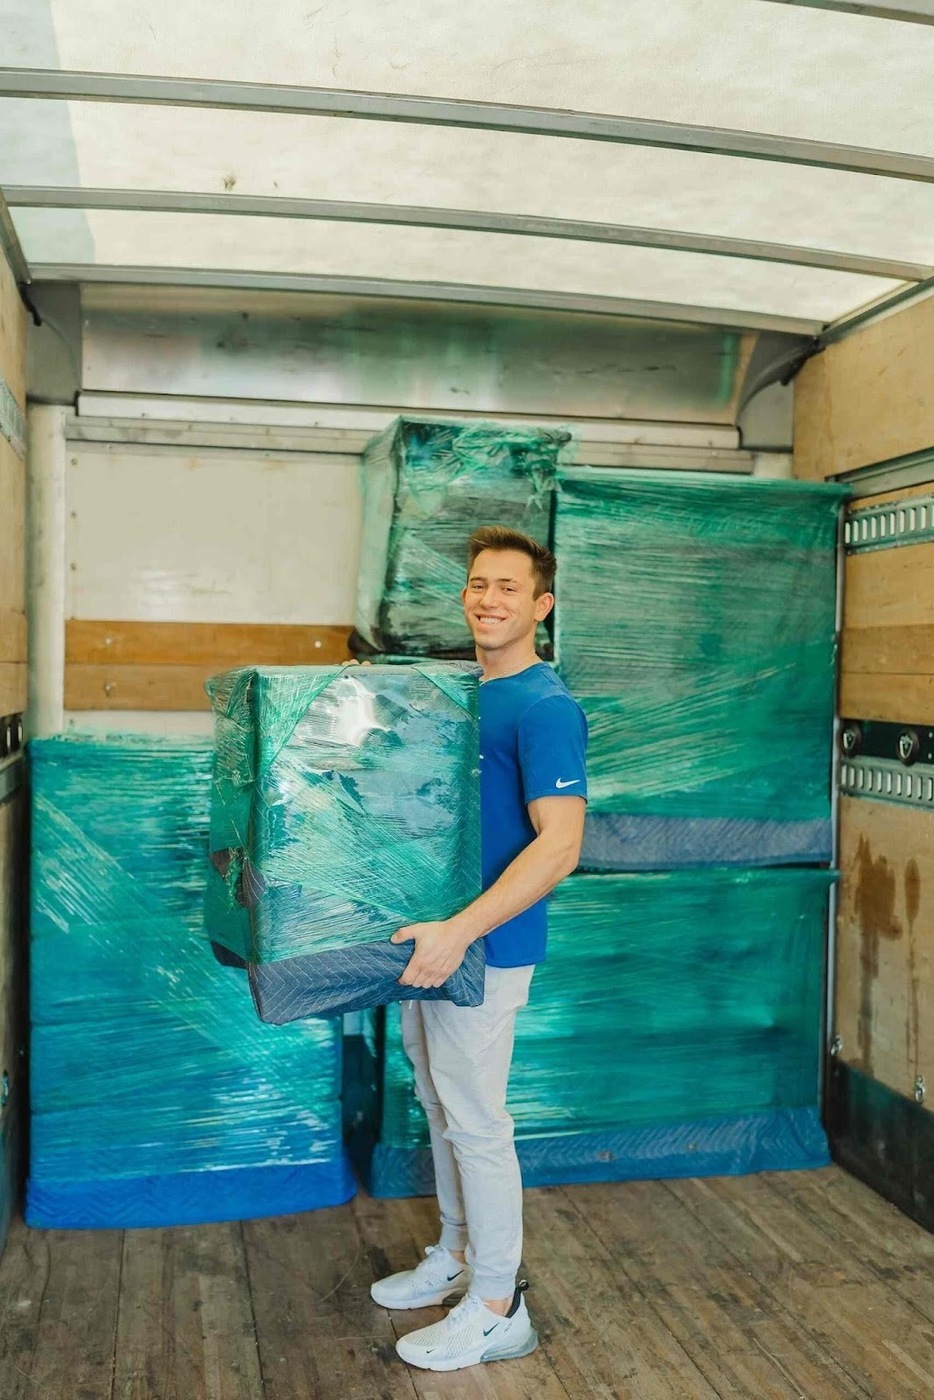 Started in 2018, U-Move is a top-rated moving company in Sacramento, CA.